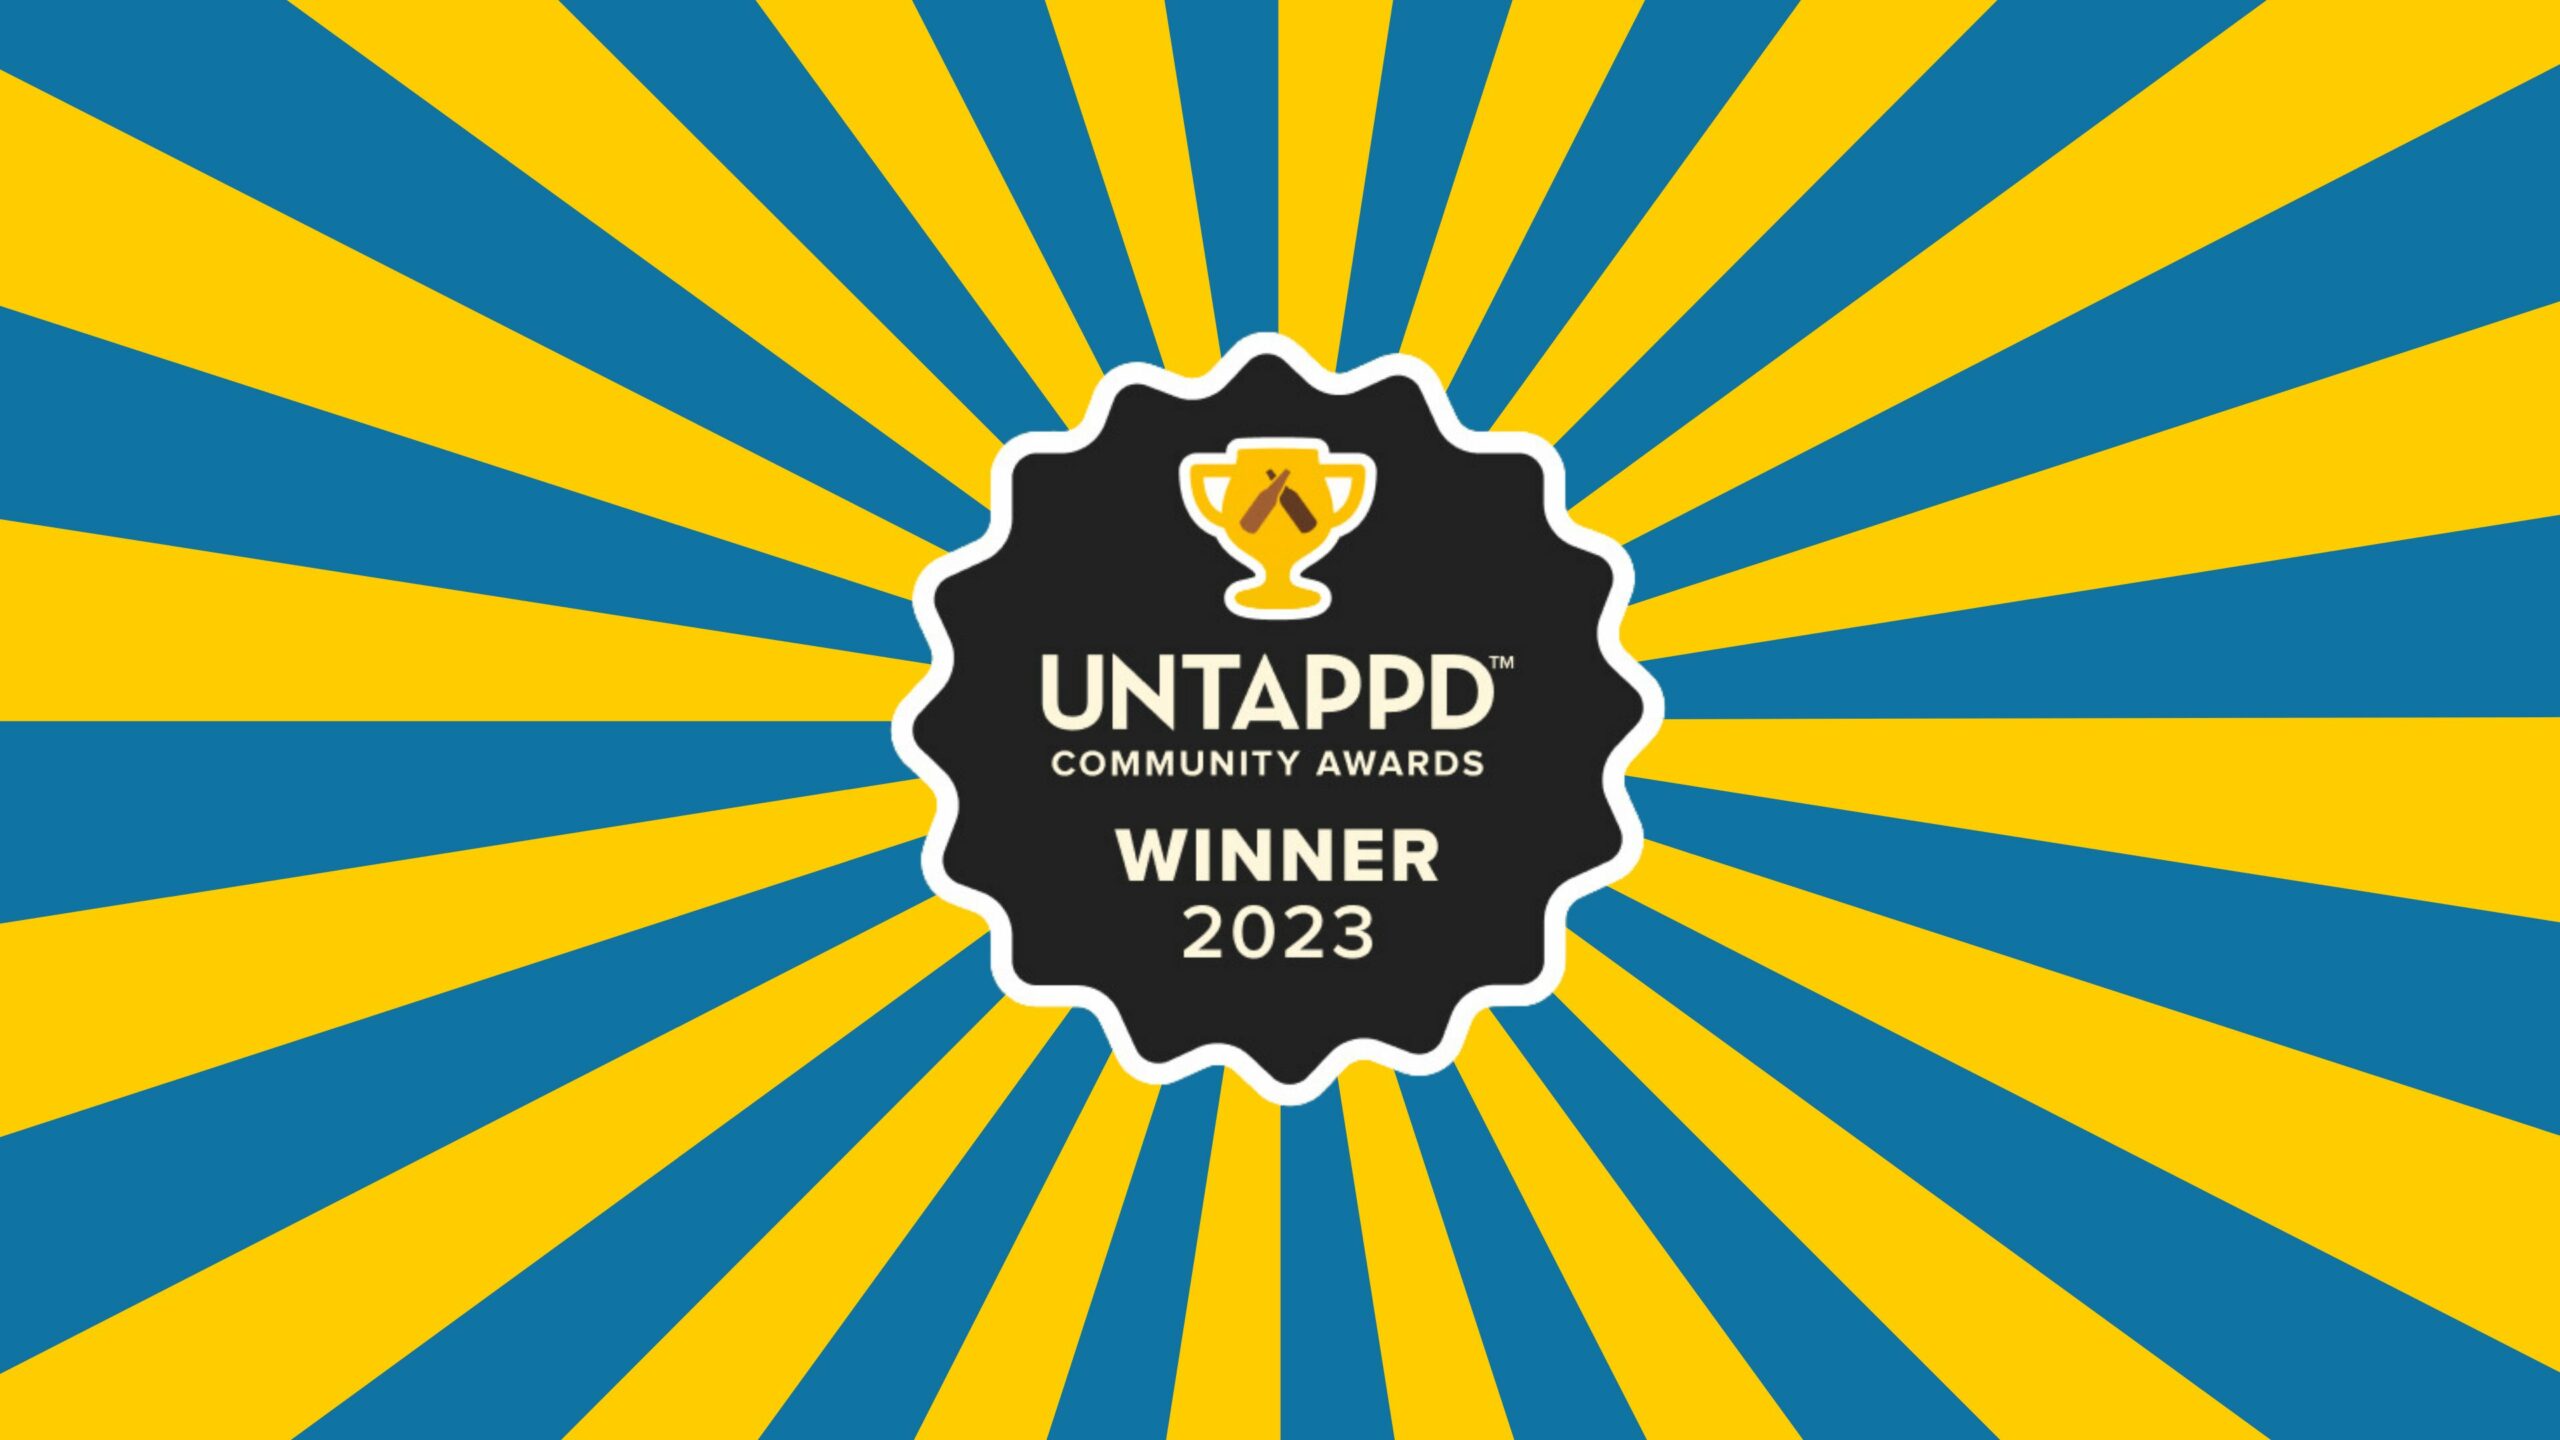 On Rotation brews named top beers in Texas in first-ever Untappd Community Awards